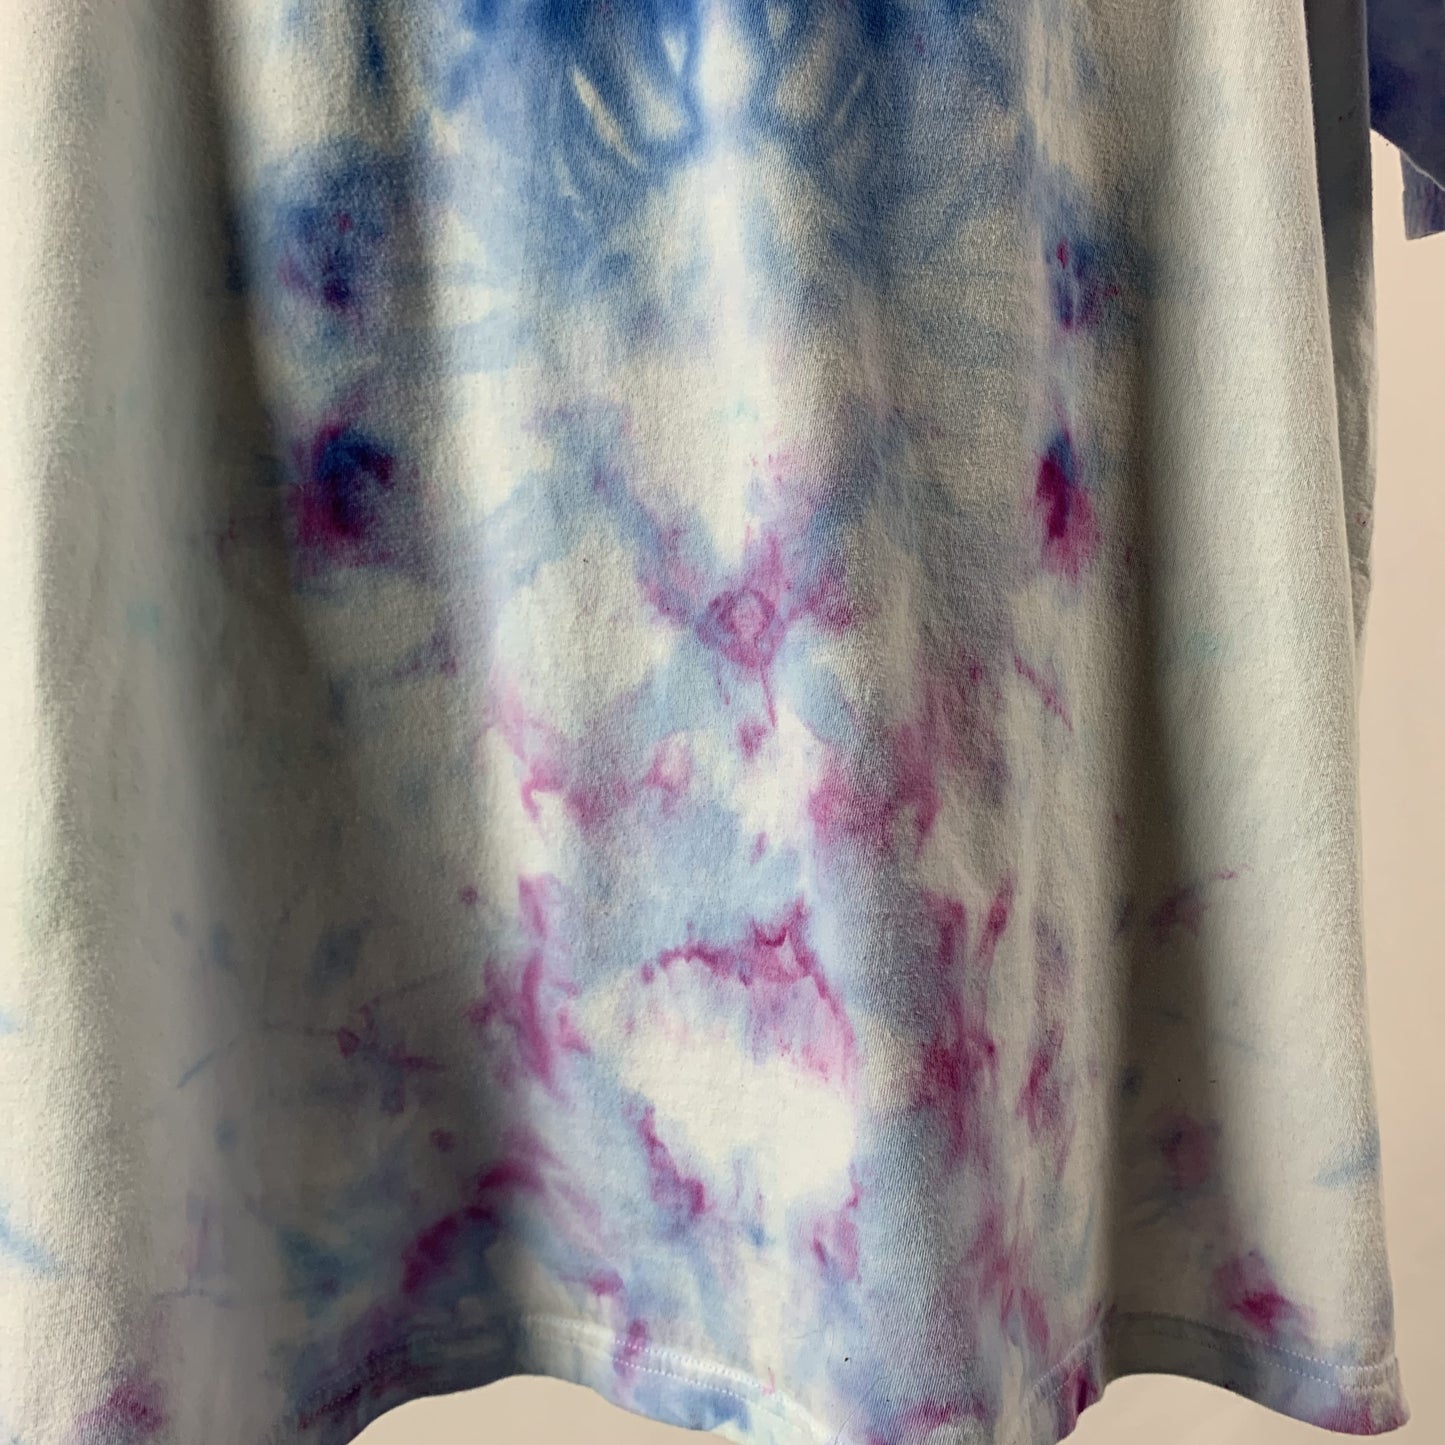 Soft Psychedelic Blues | T-shirt | 48+” chest